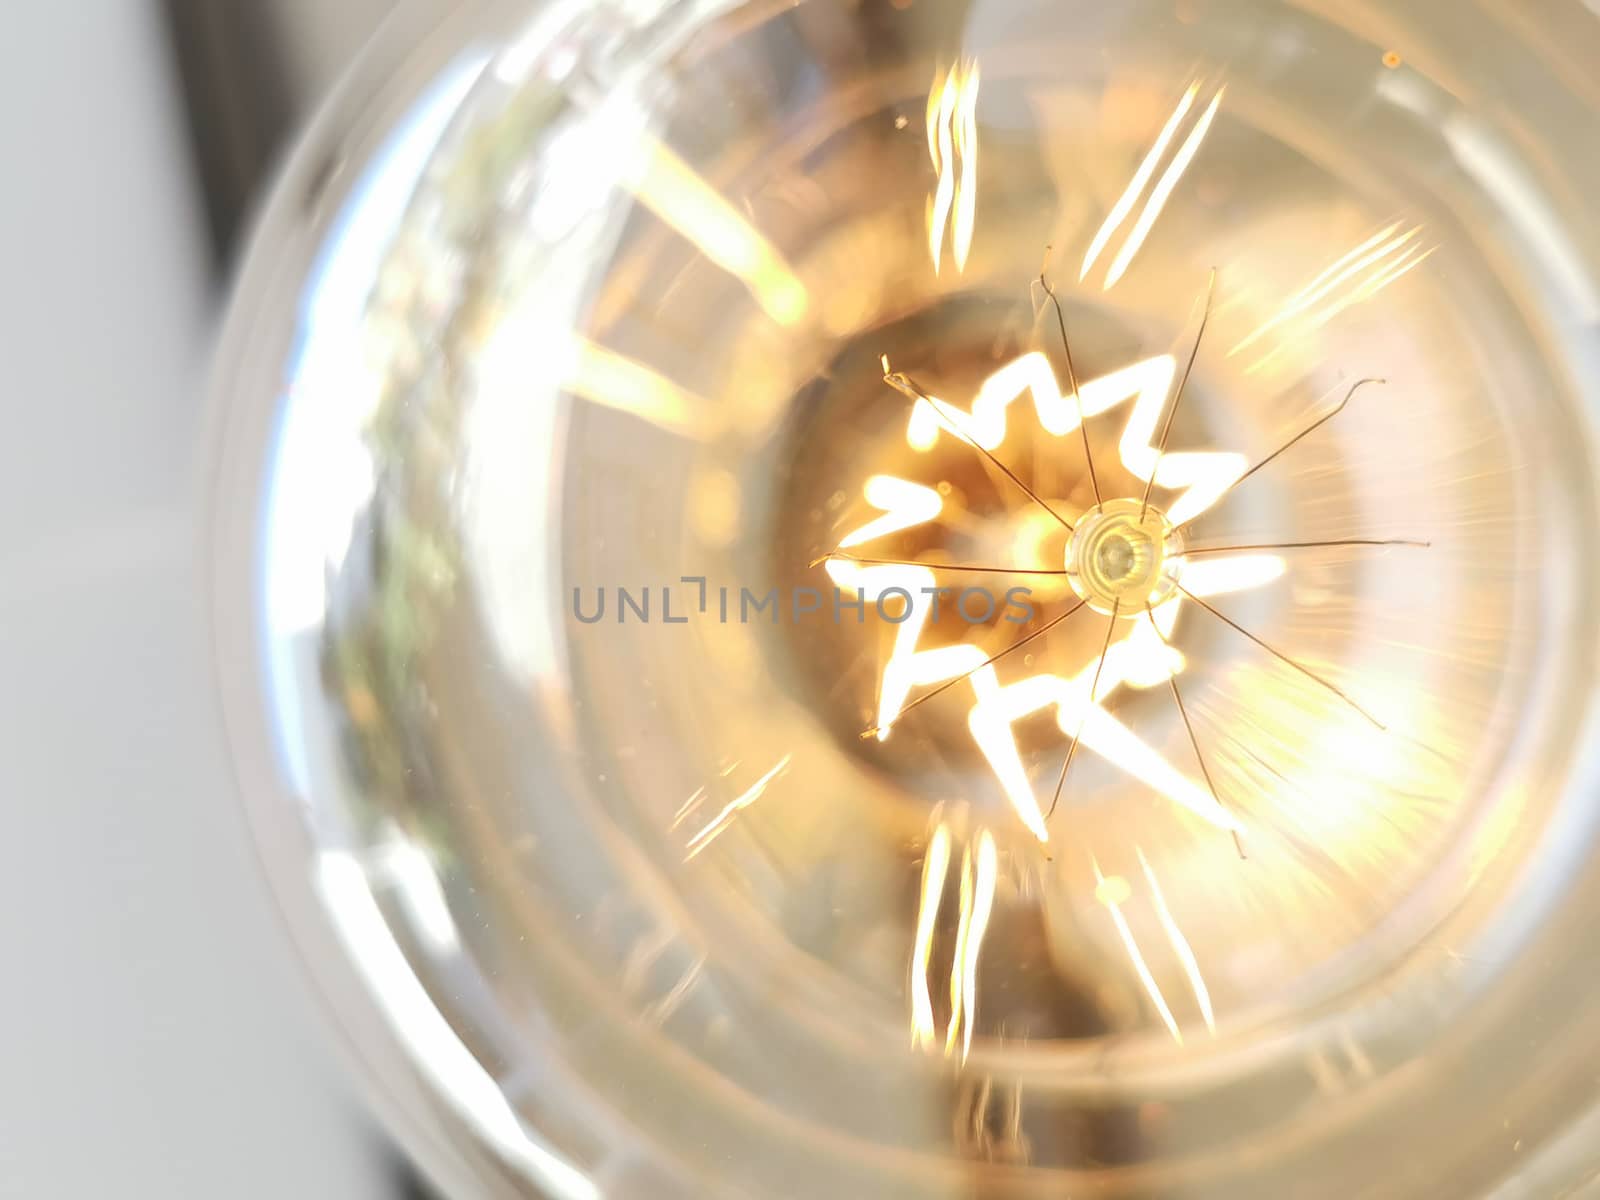 Amazing spiral electric current inside a retro crystal clear lig by sonandonures